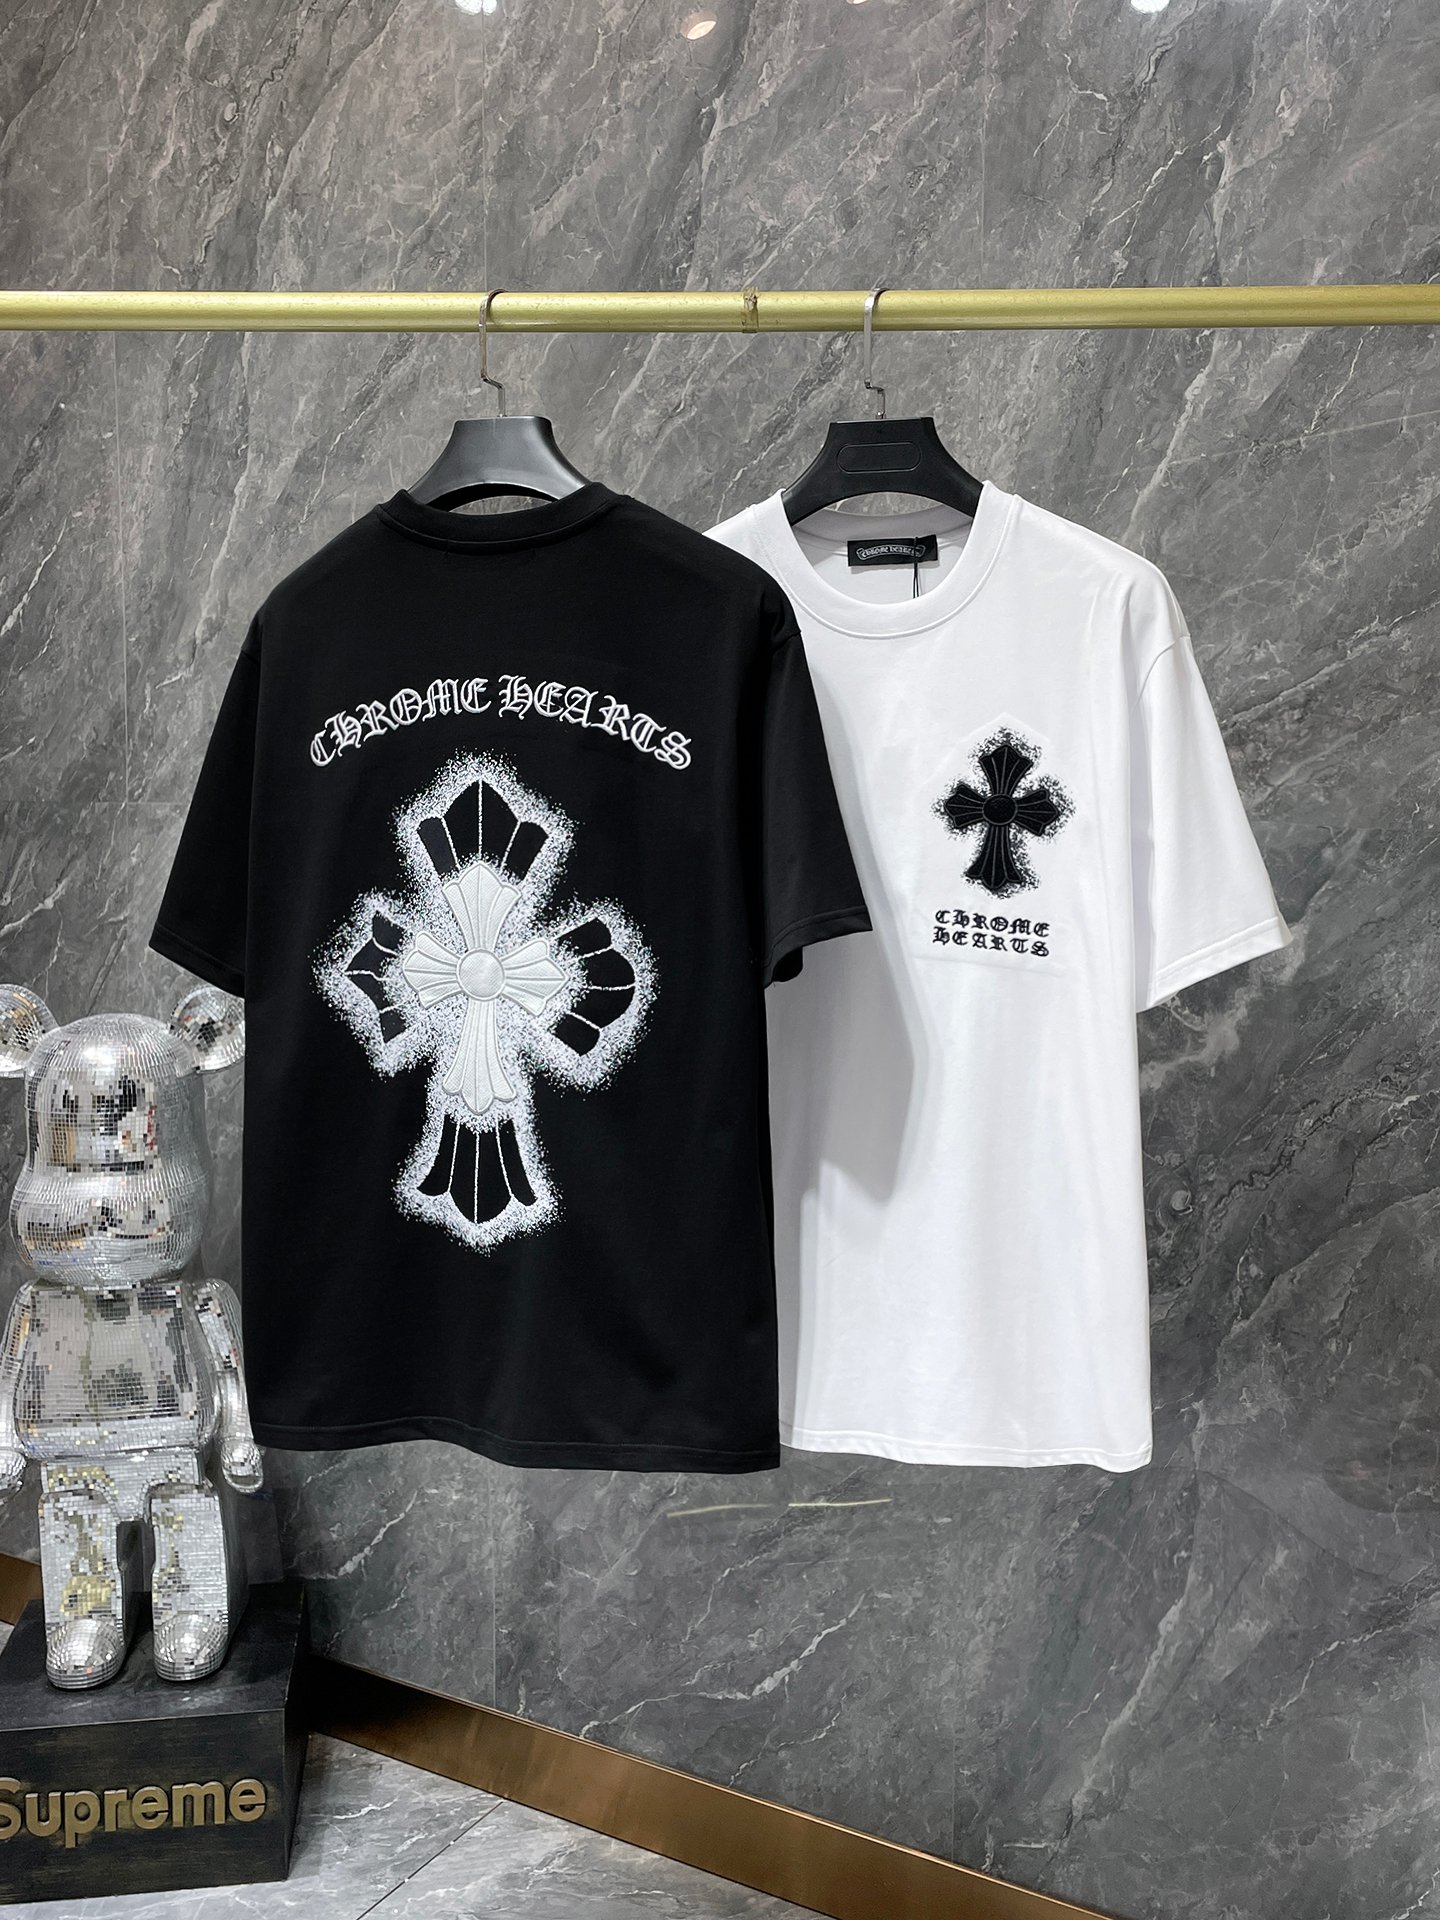 Chrome Hearts Sale
 Clothing T-Shirt Black White Embroidery Summer Collection Short Sleeve